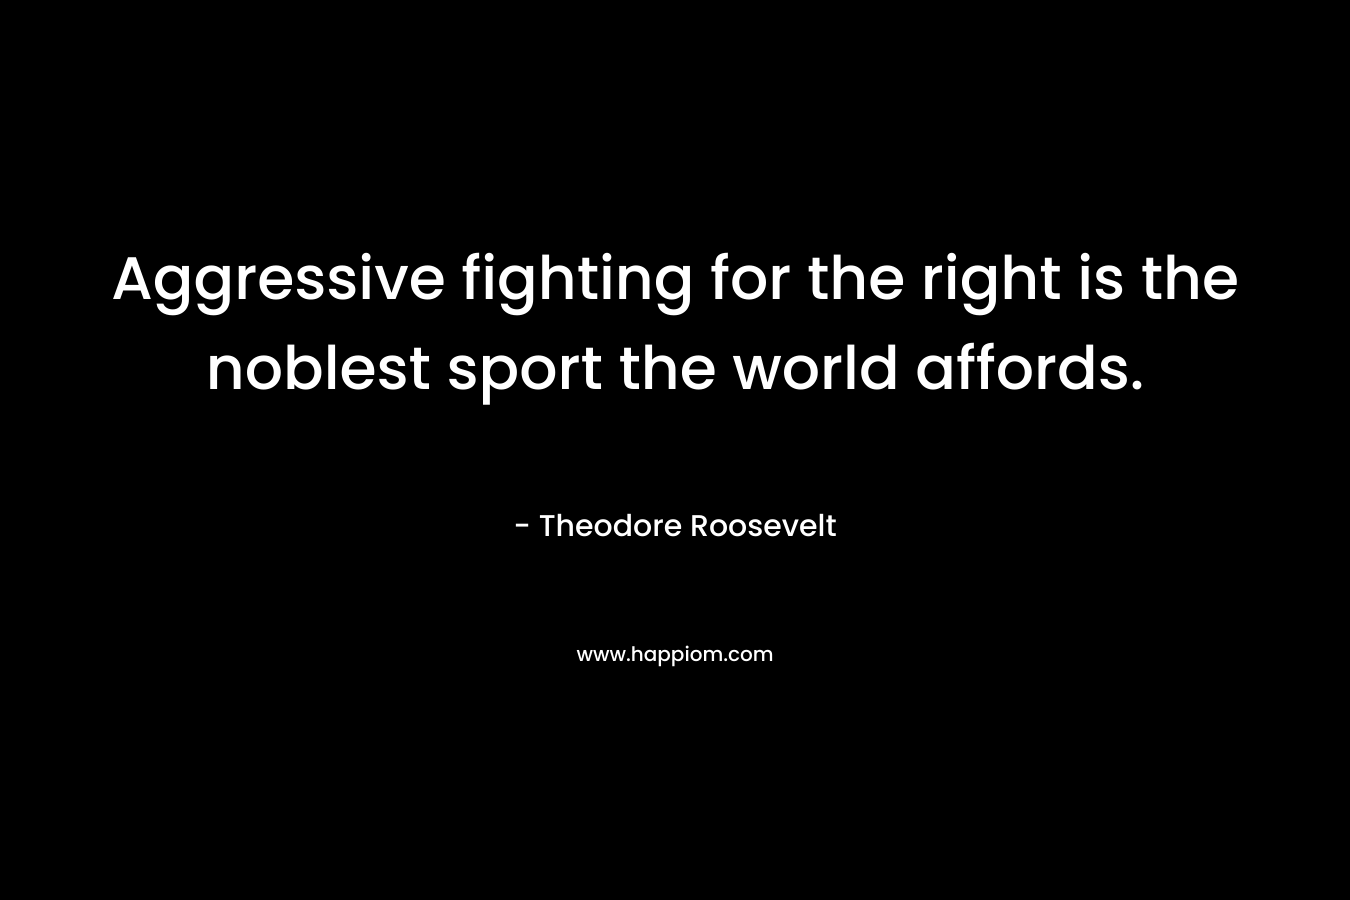 Aggressive fighting for the right is the noblest sport the world affords. – Theodore Roosevelt